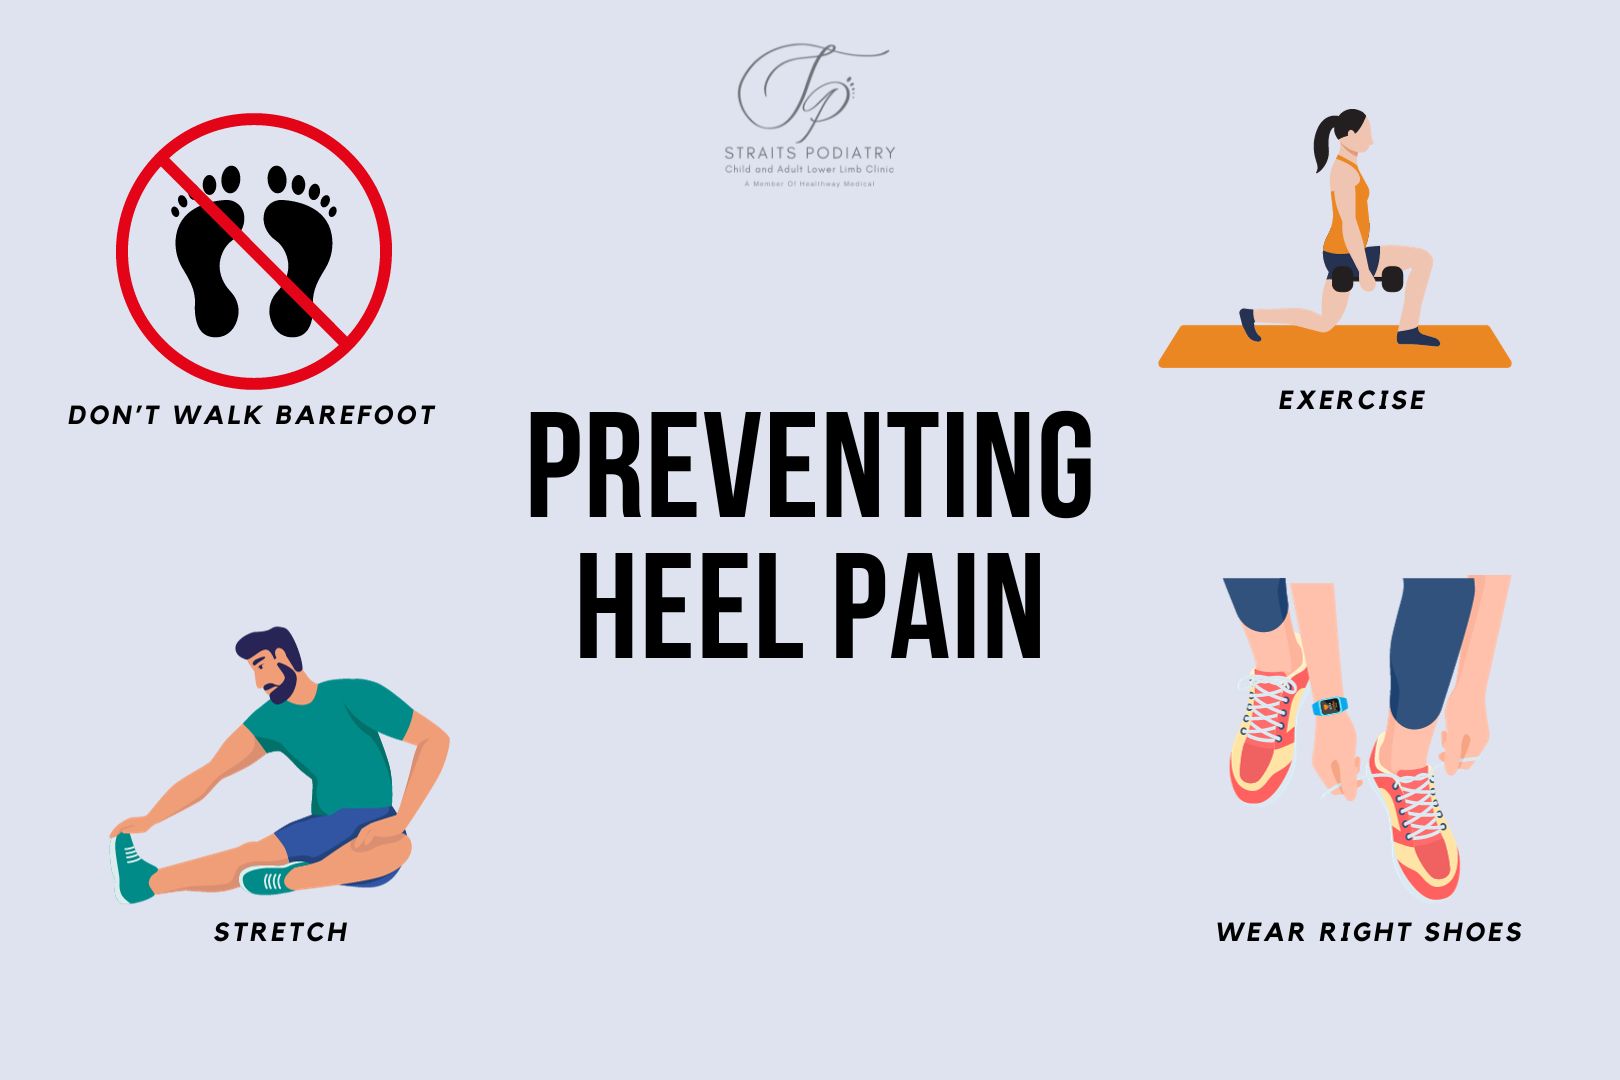 An infographic created by Straits Podiatry in Singapore to provide the tips for preventing heel pain in Singapore.